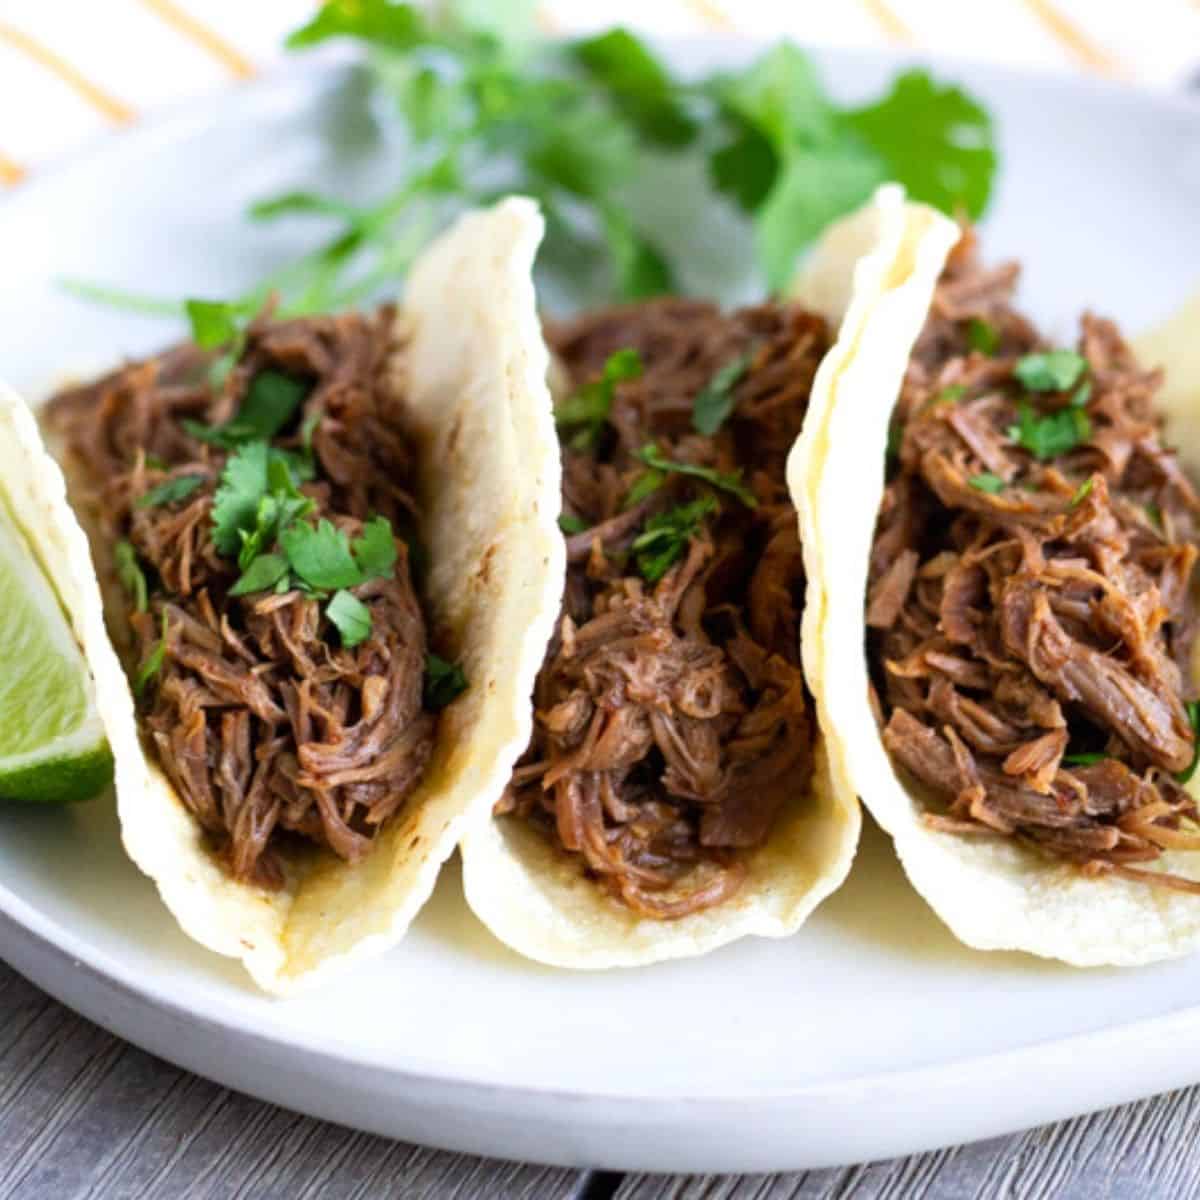 Instant Pot Mexican Shredded Beef